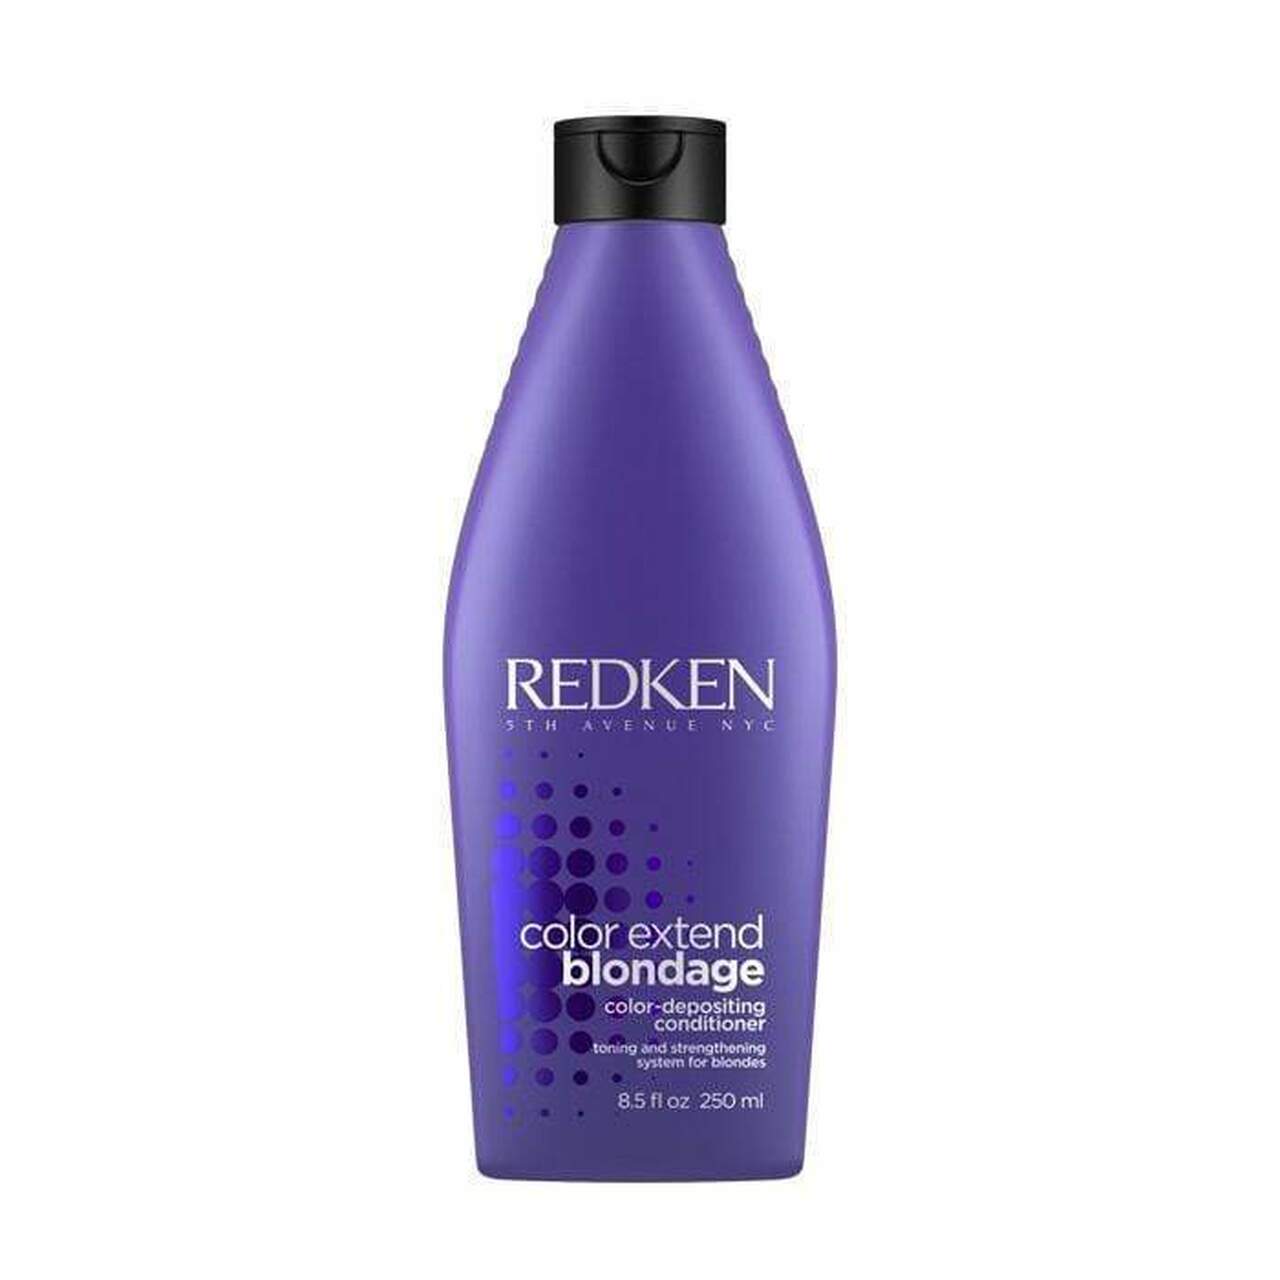 REDKEN_Color Extend Blondage Conditioner_Cosmetic World